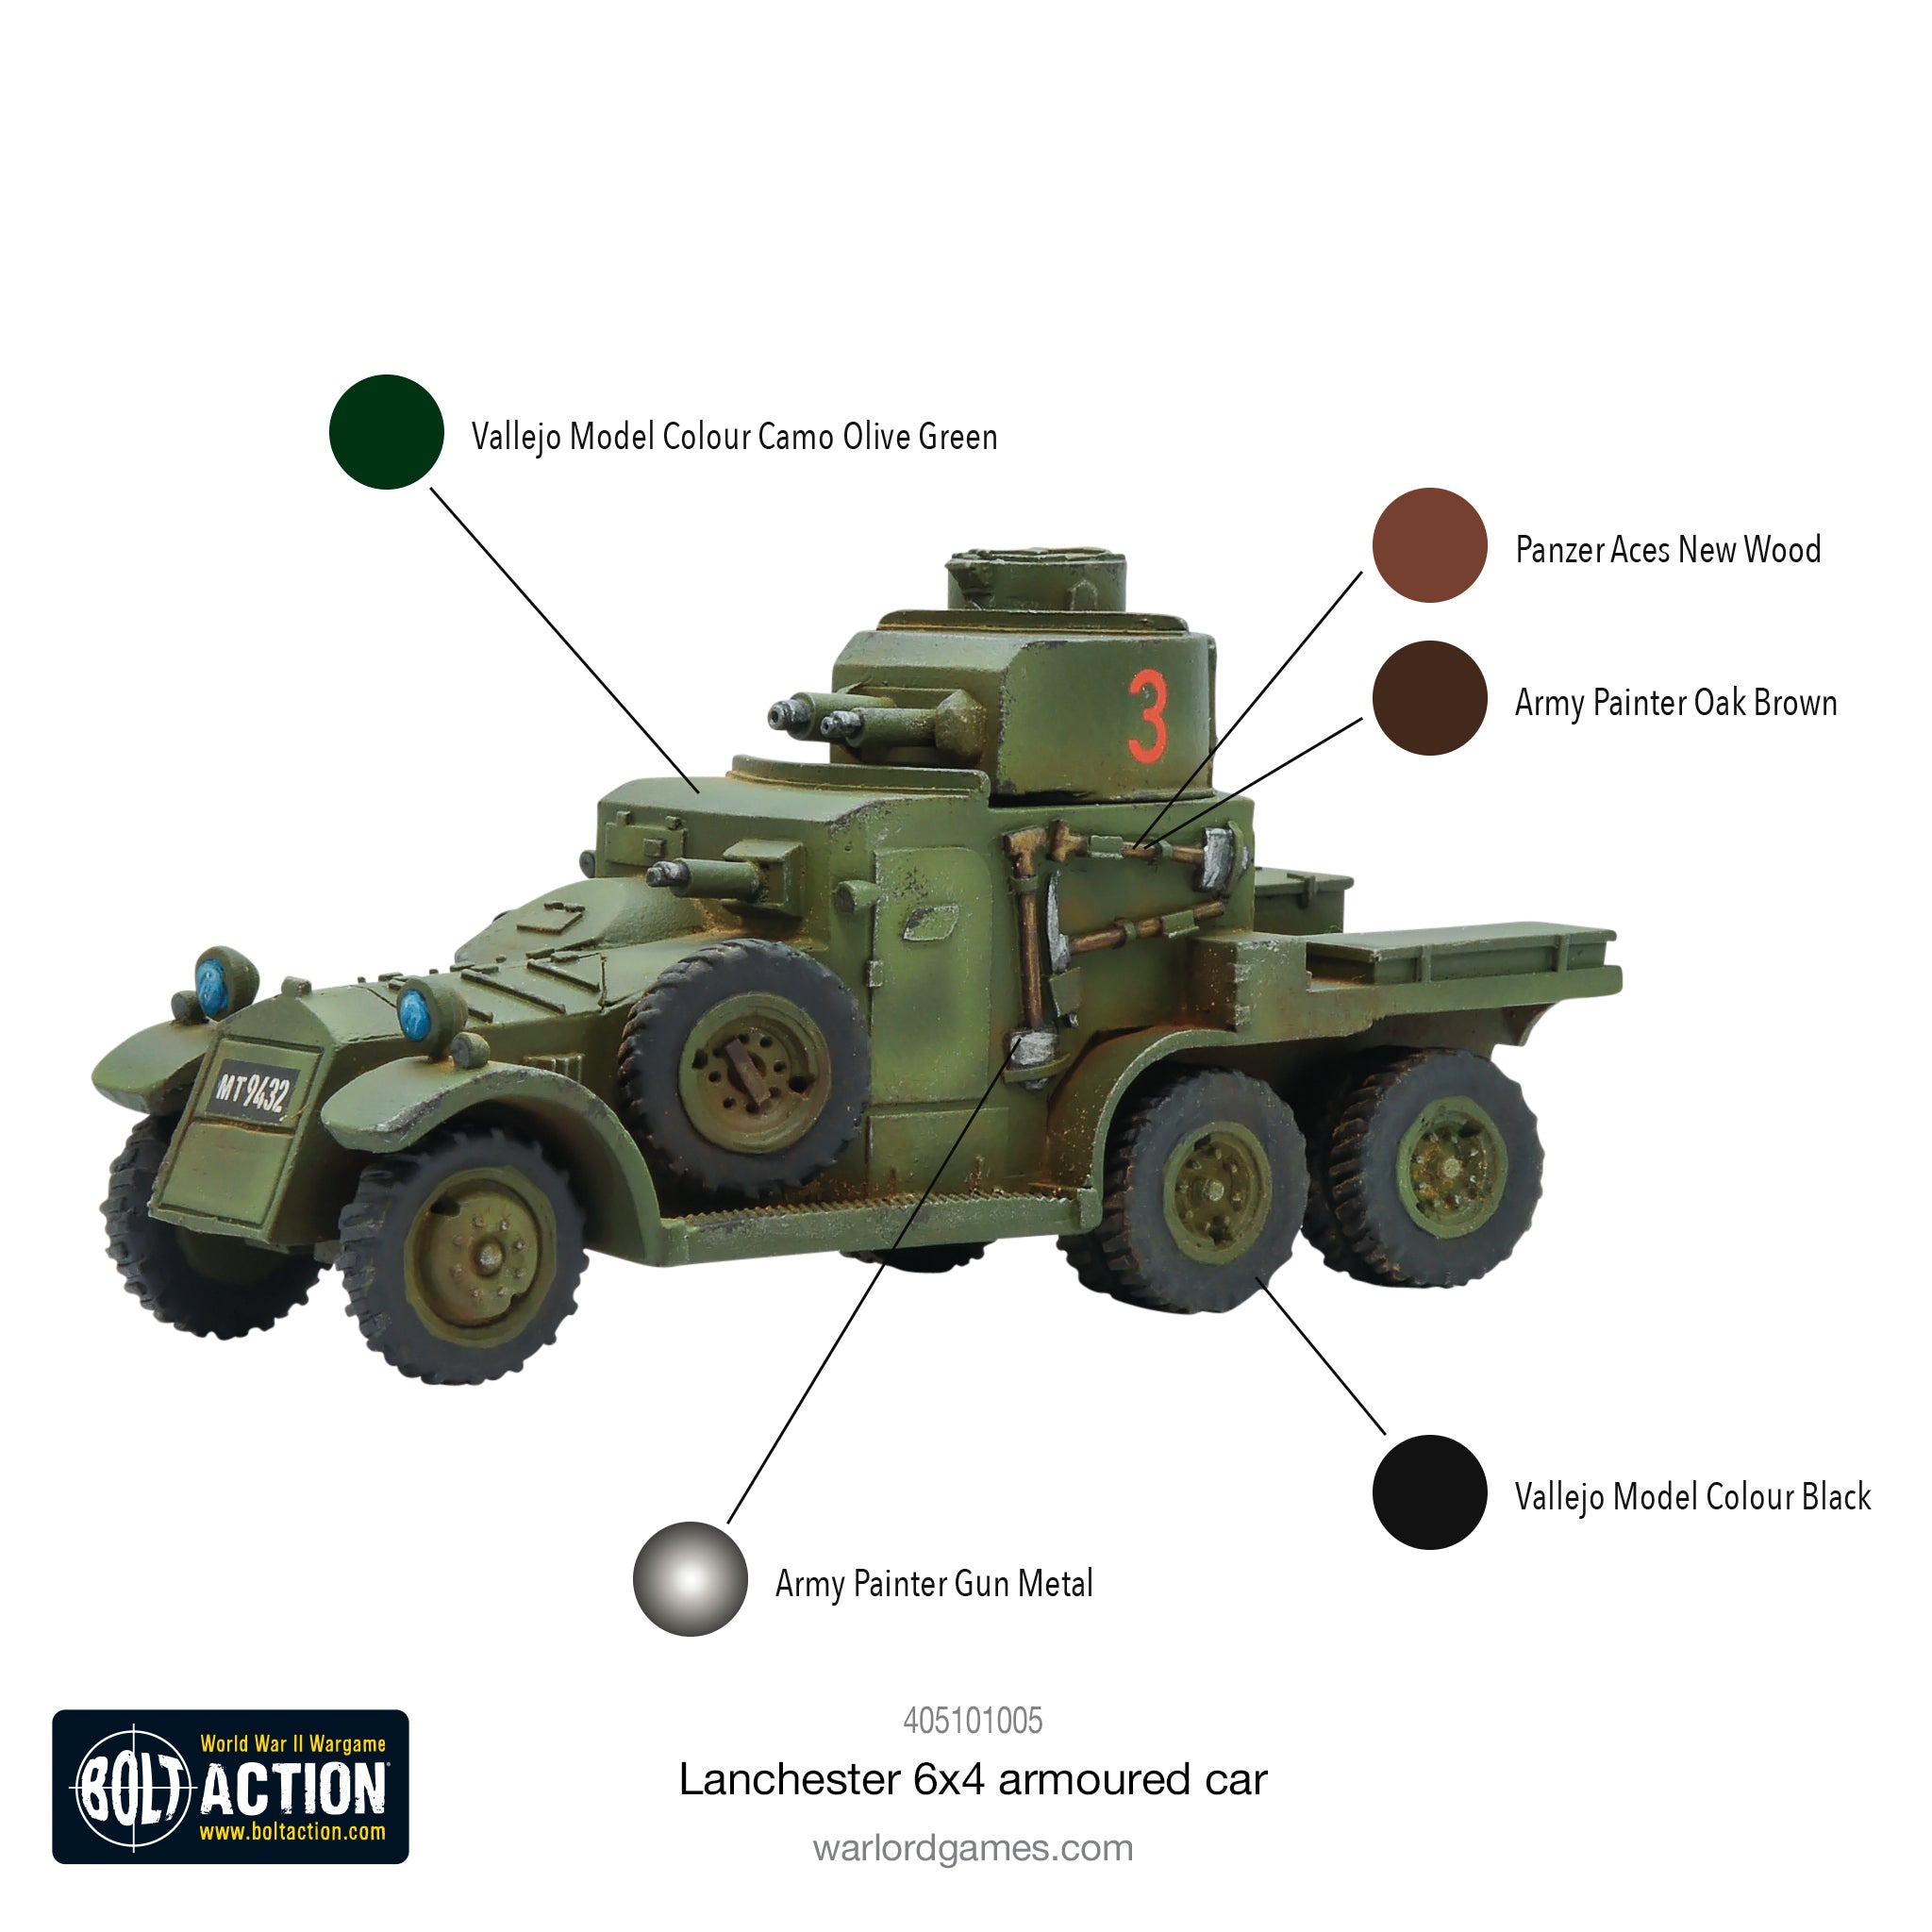 Lanchester 6x4 armoured car